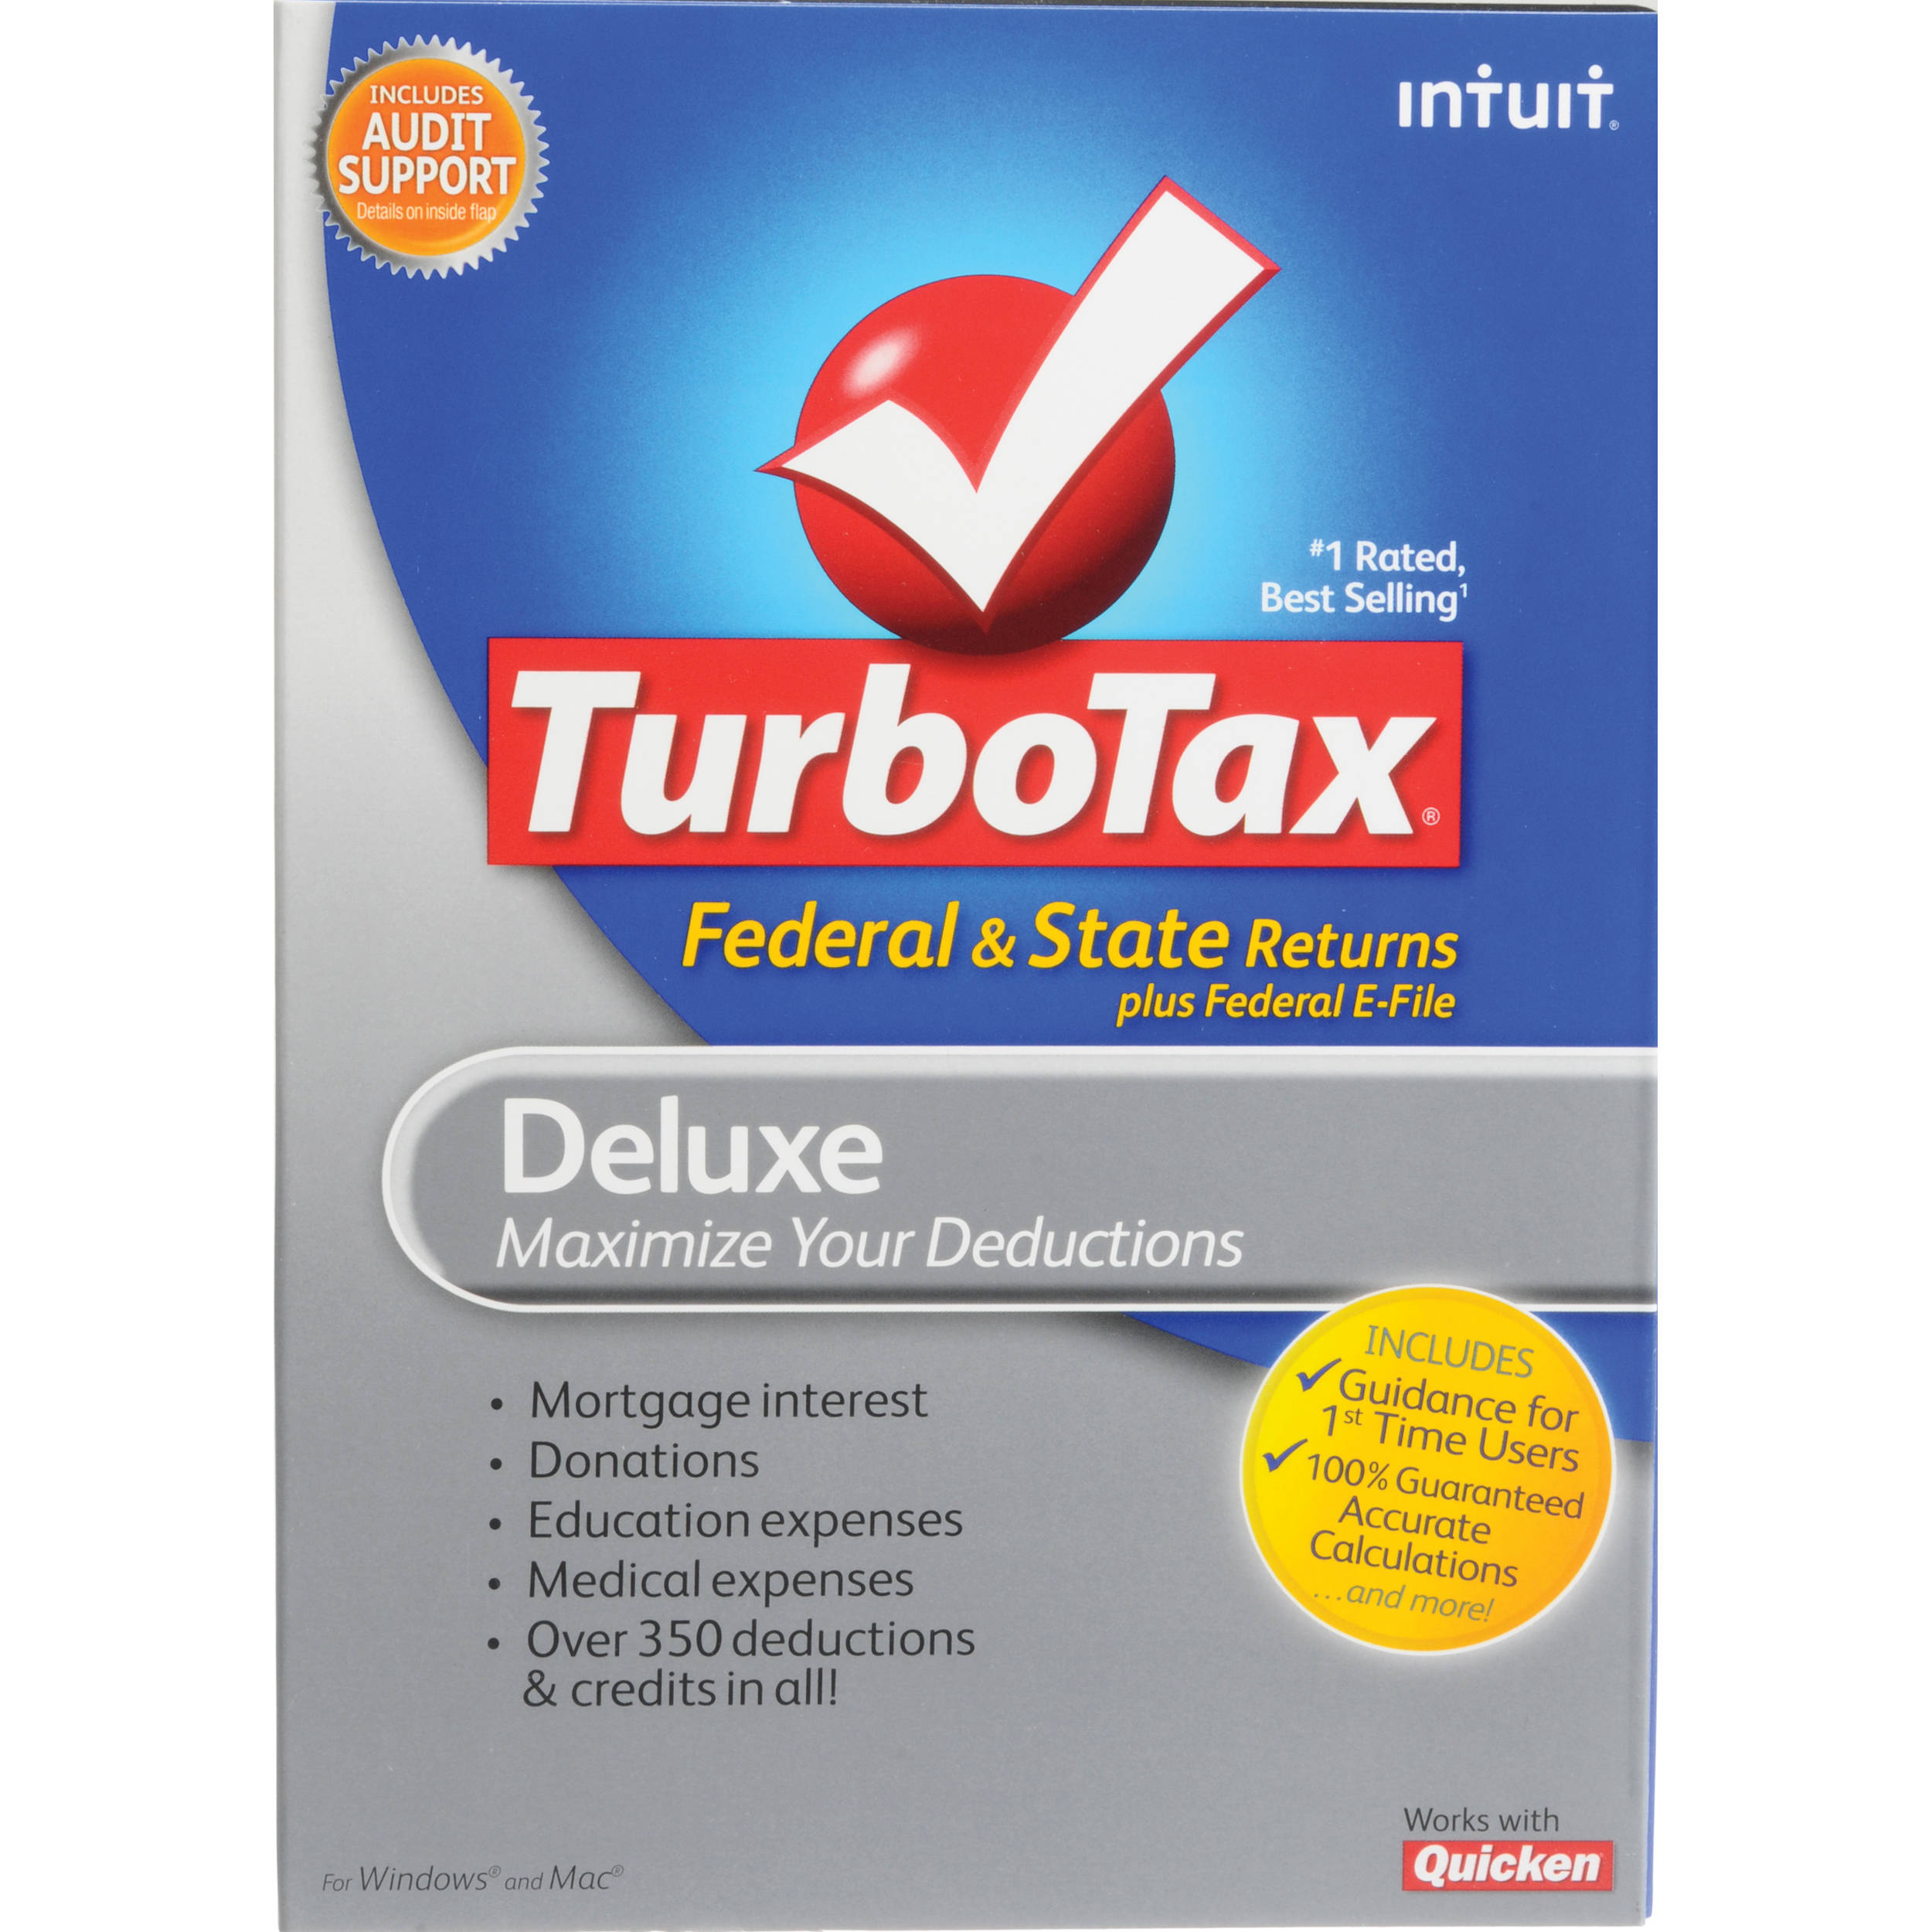 Turbotax for 2011 tax year